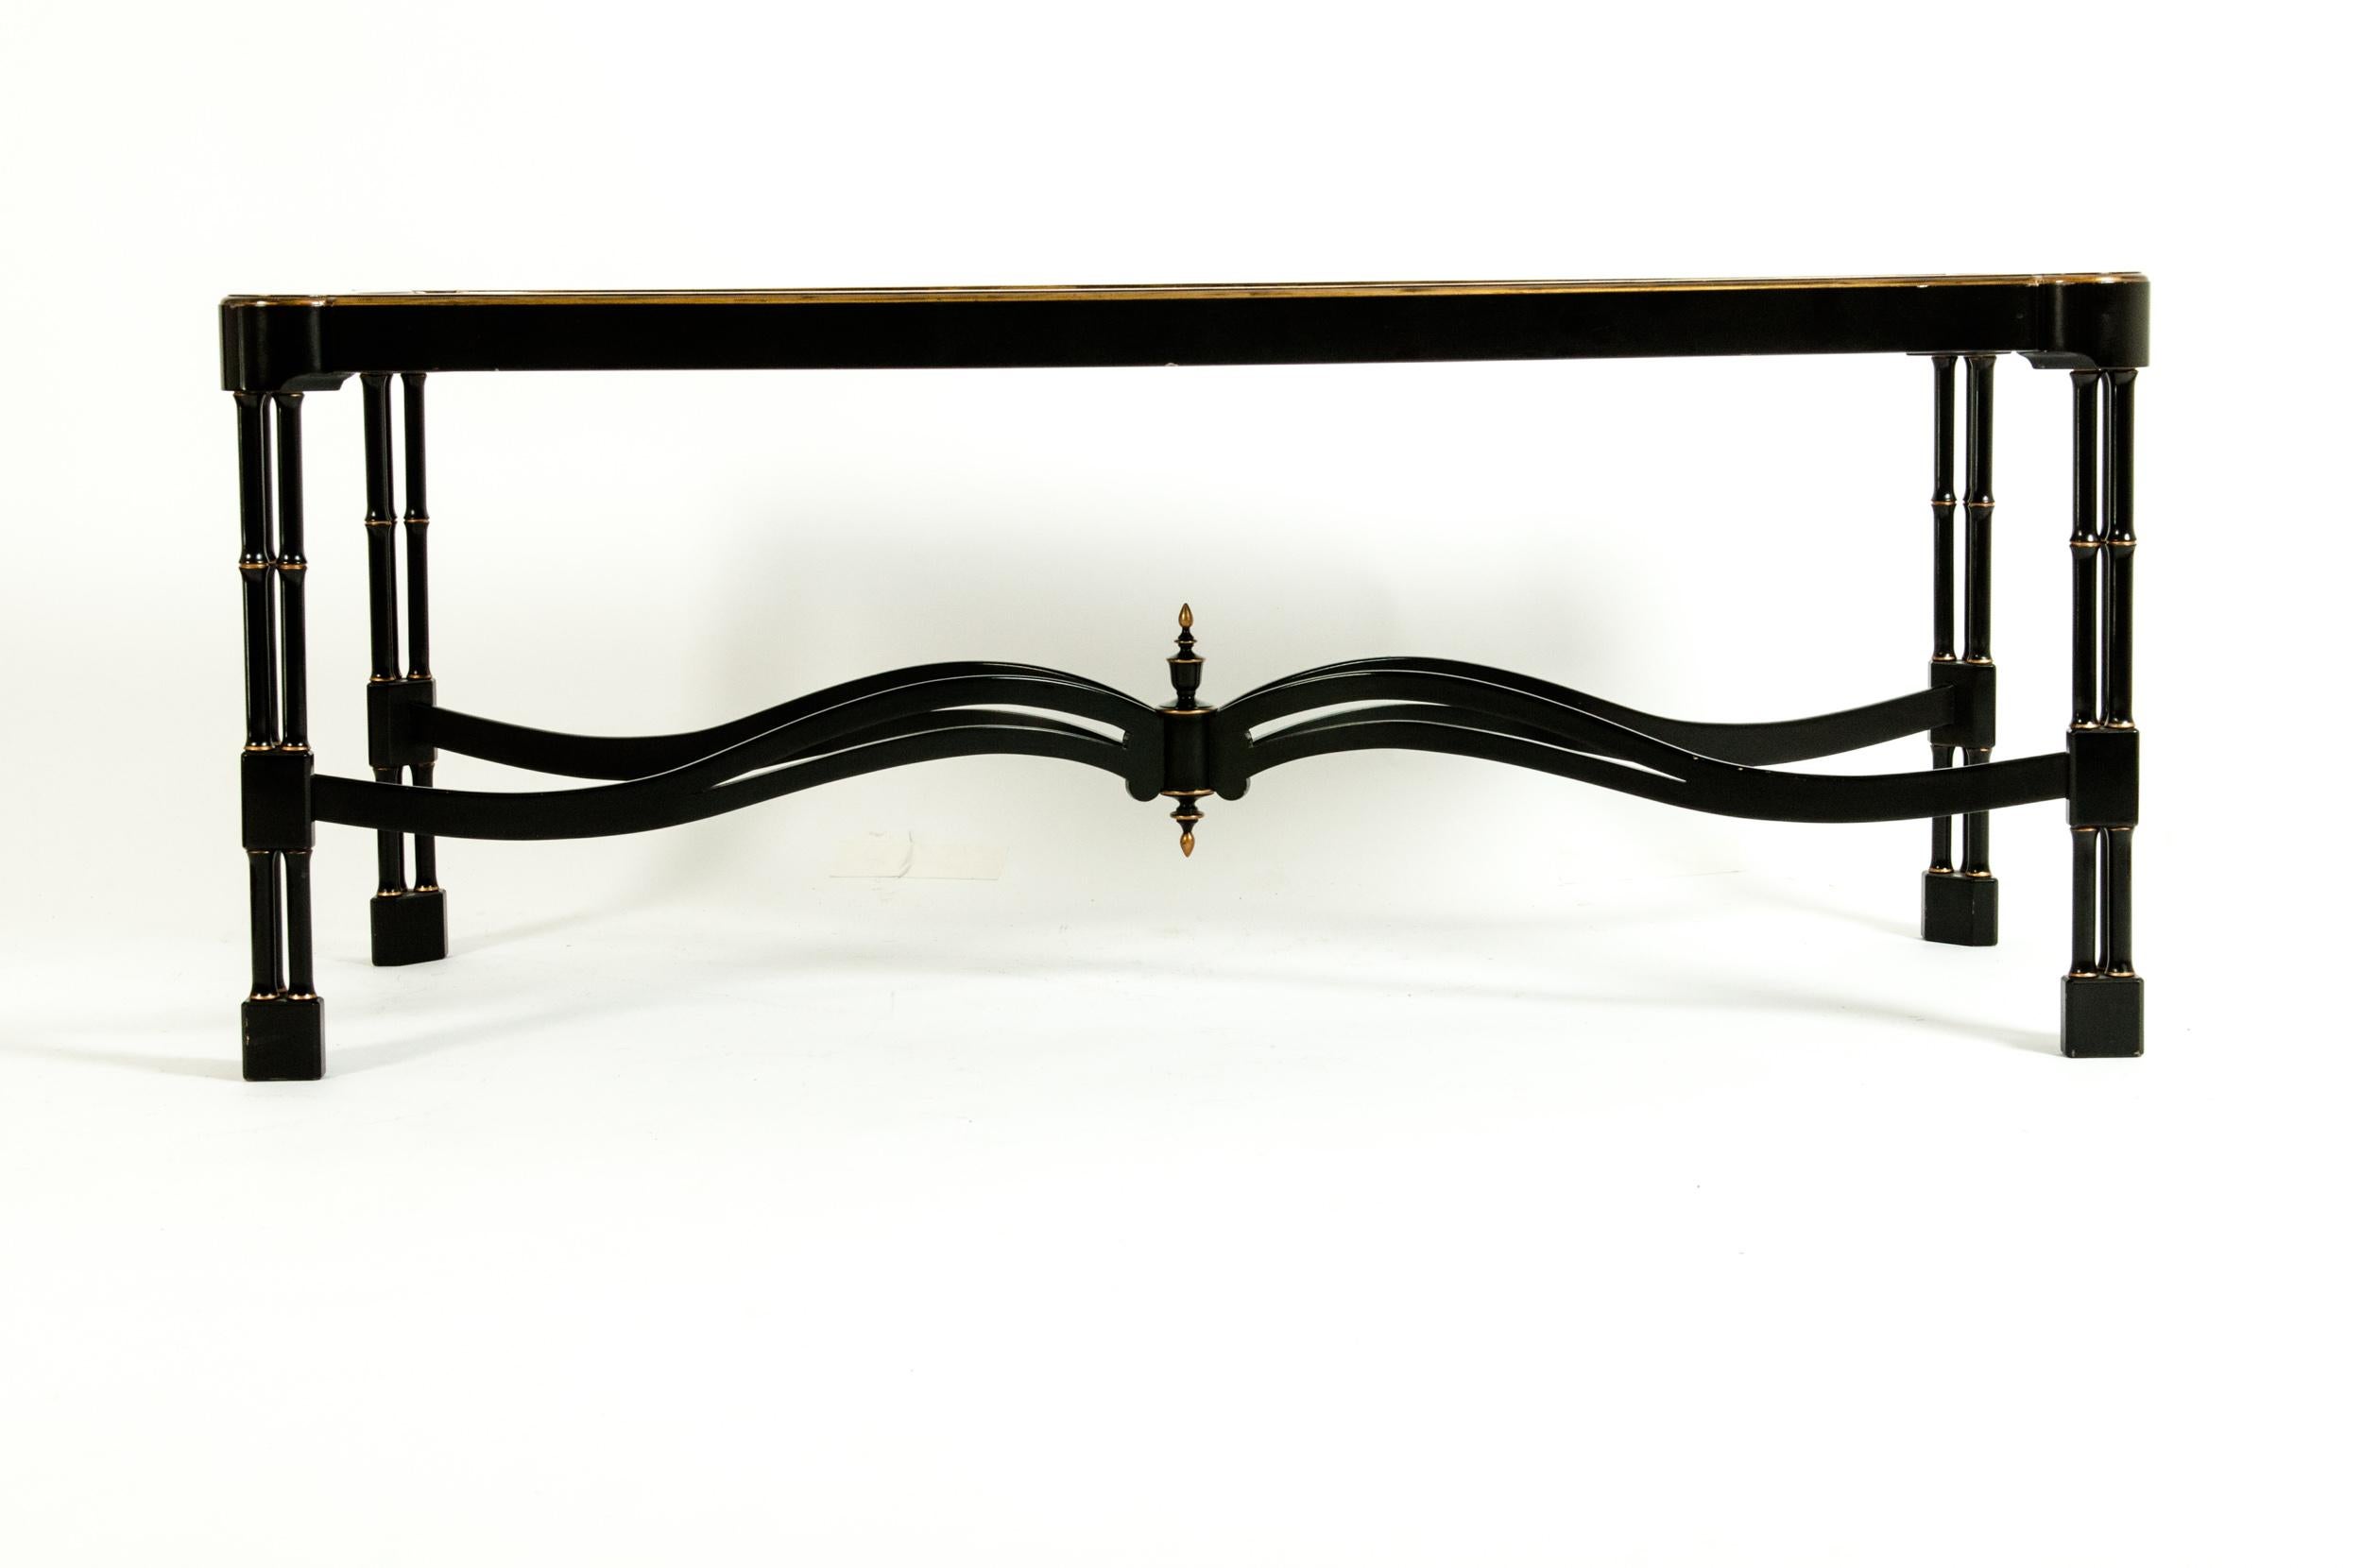 Mid-20th century style lacquered & gilt gold decorated design details Italian coffee table having X-form base stretcher. The table is in excellent vintage condition. Minor wear consistent with age / use. The table measure about 50 inches long x 20